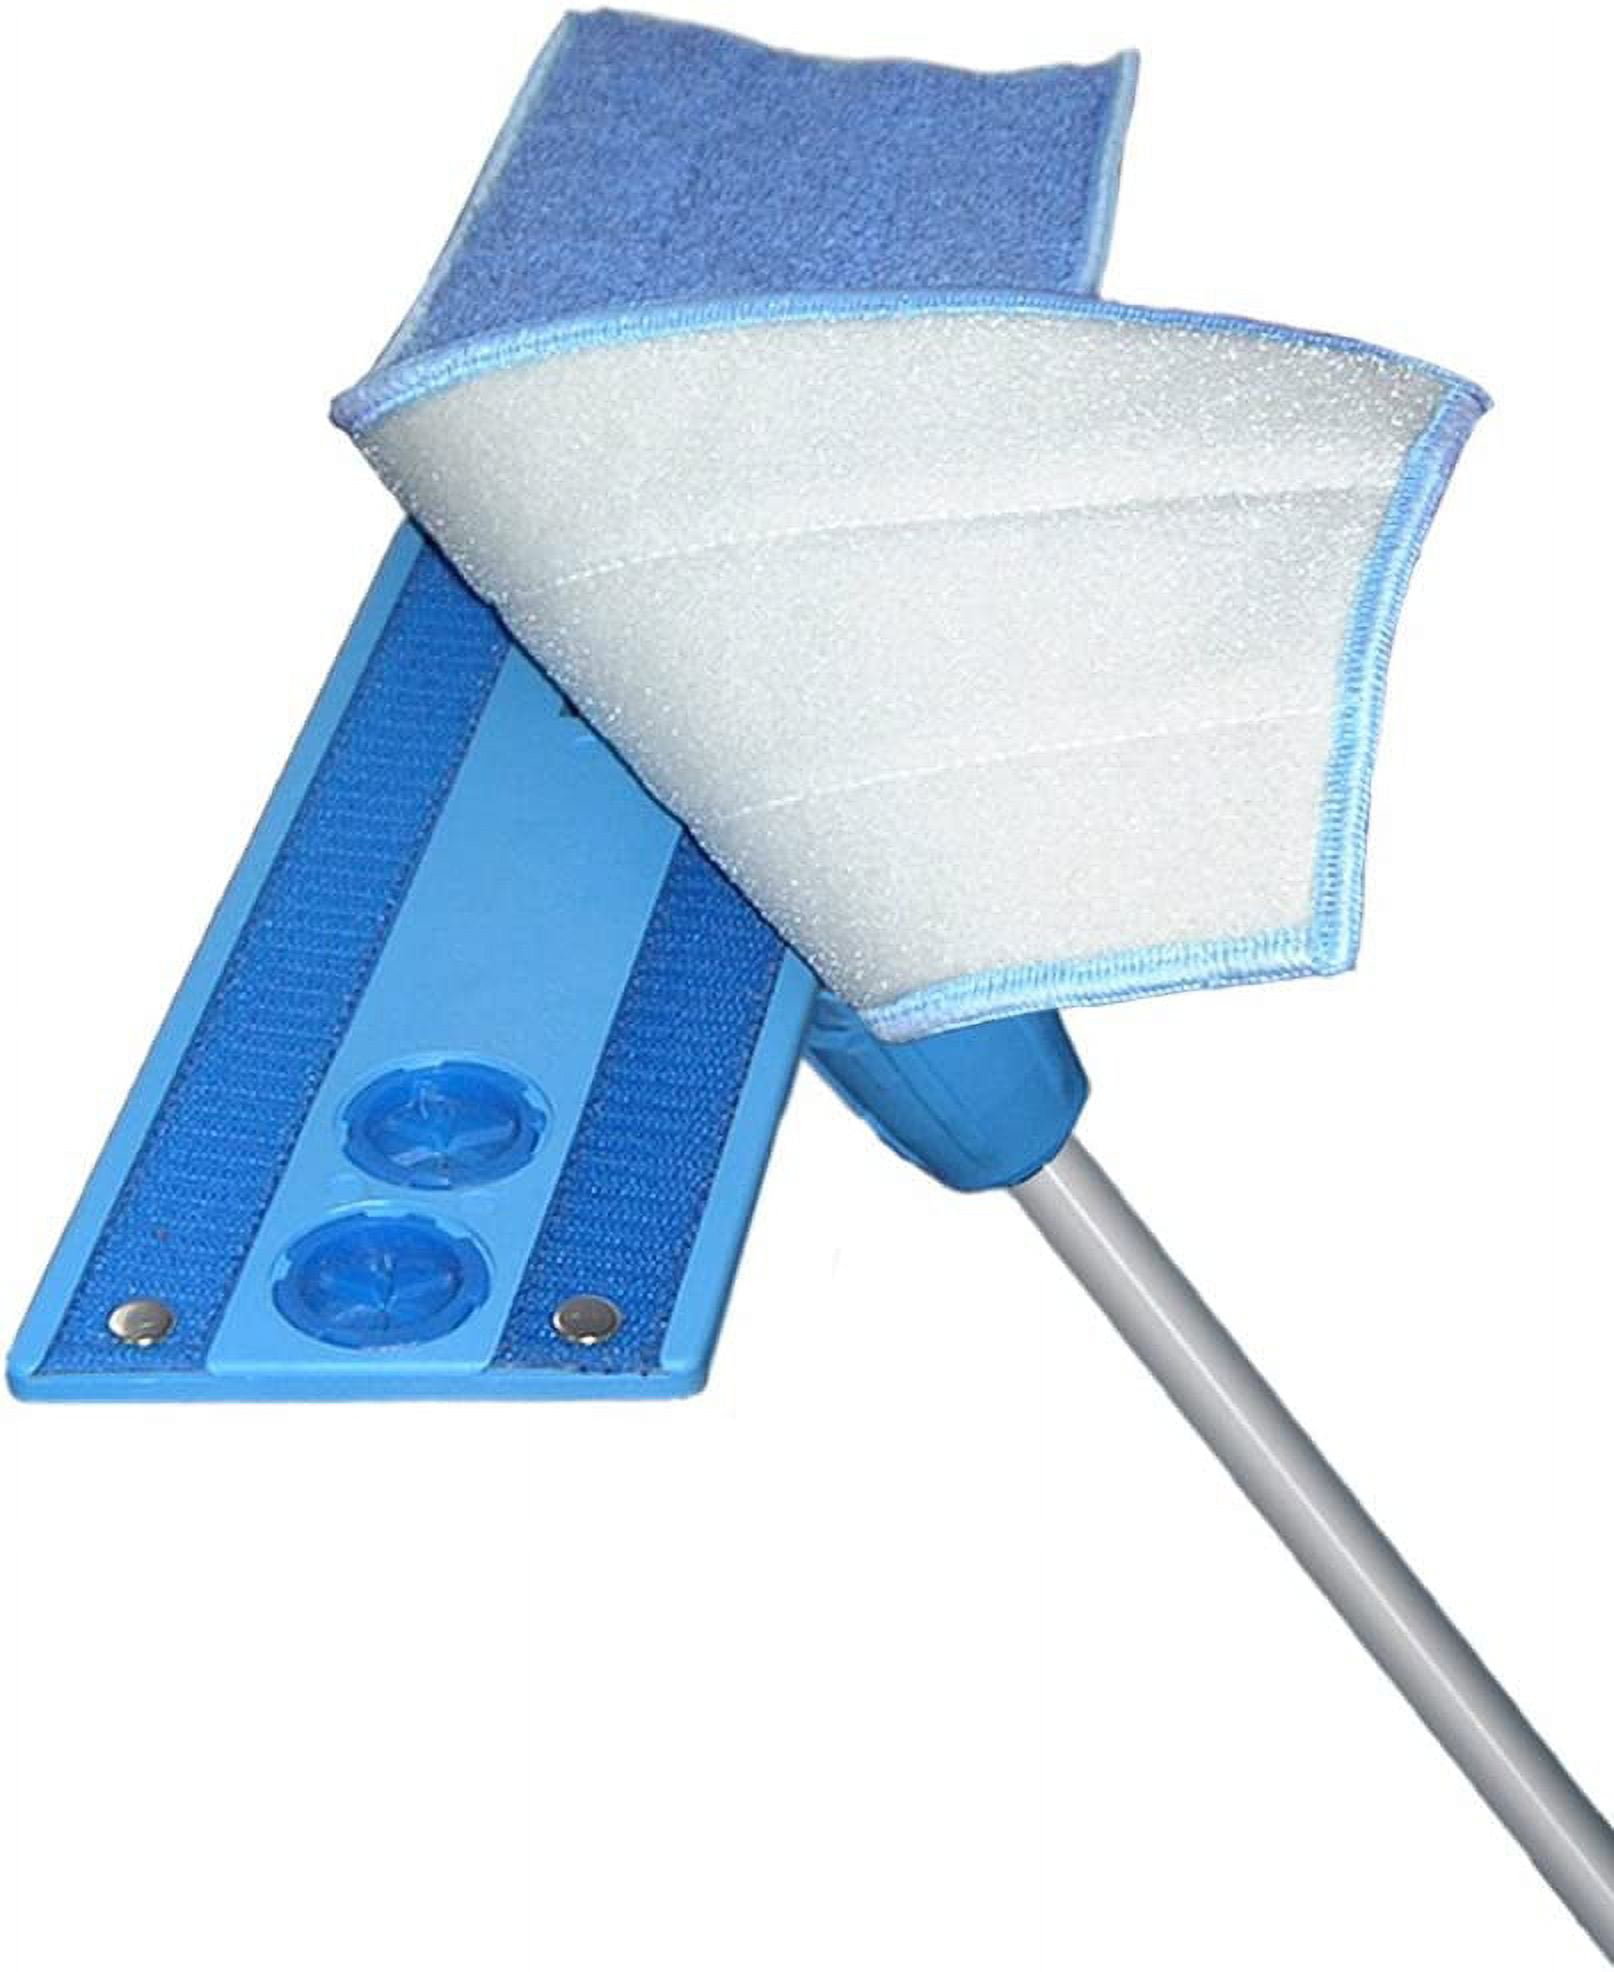  Superio Miracle Mop Set Microfiber Flat Mop Wet and Dust Mop  Best Mop for Vinyl Plank, Hardwood, Laminate, Tile Flooring, Wall, with  Aluminum Telescopic Handle, and Velcro Microfiber Mop Pad, Grey 